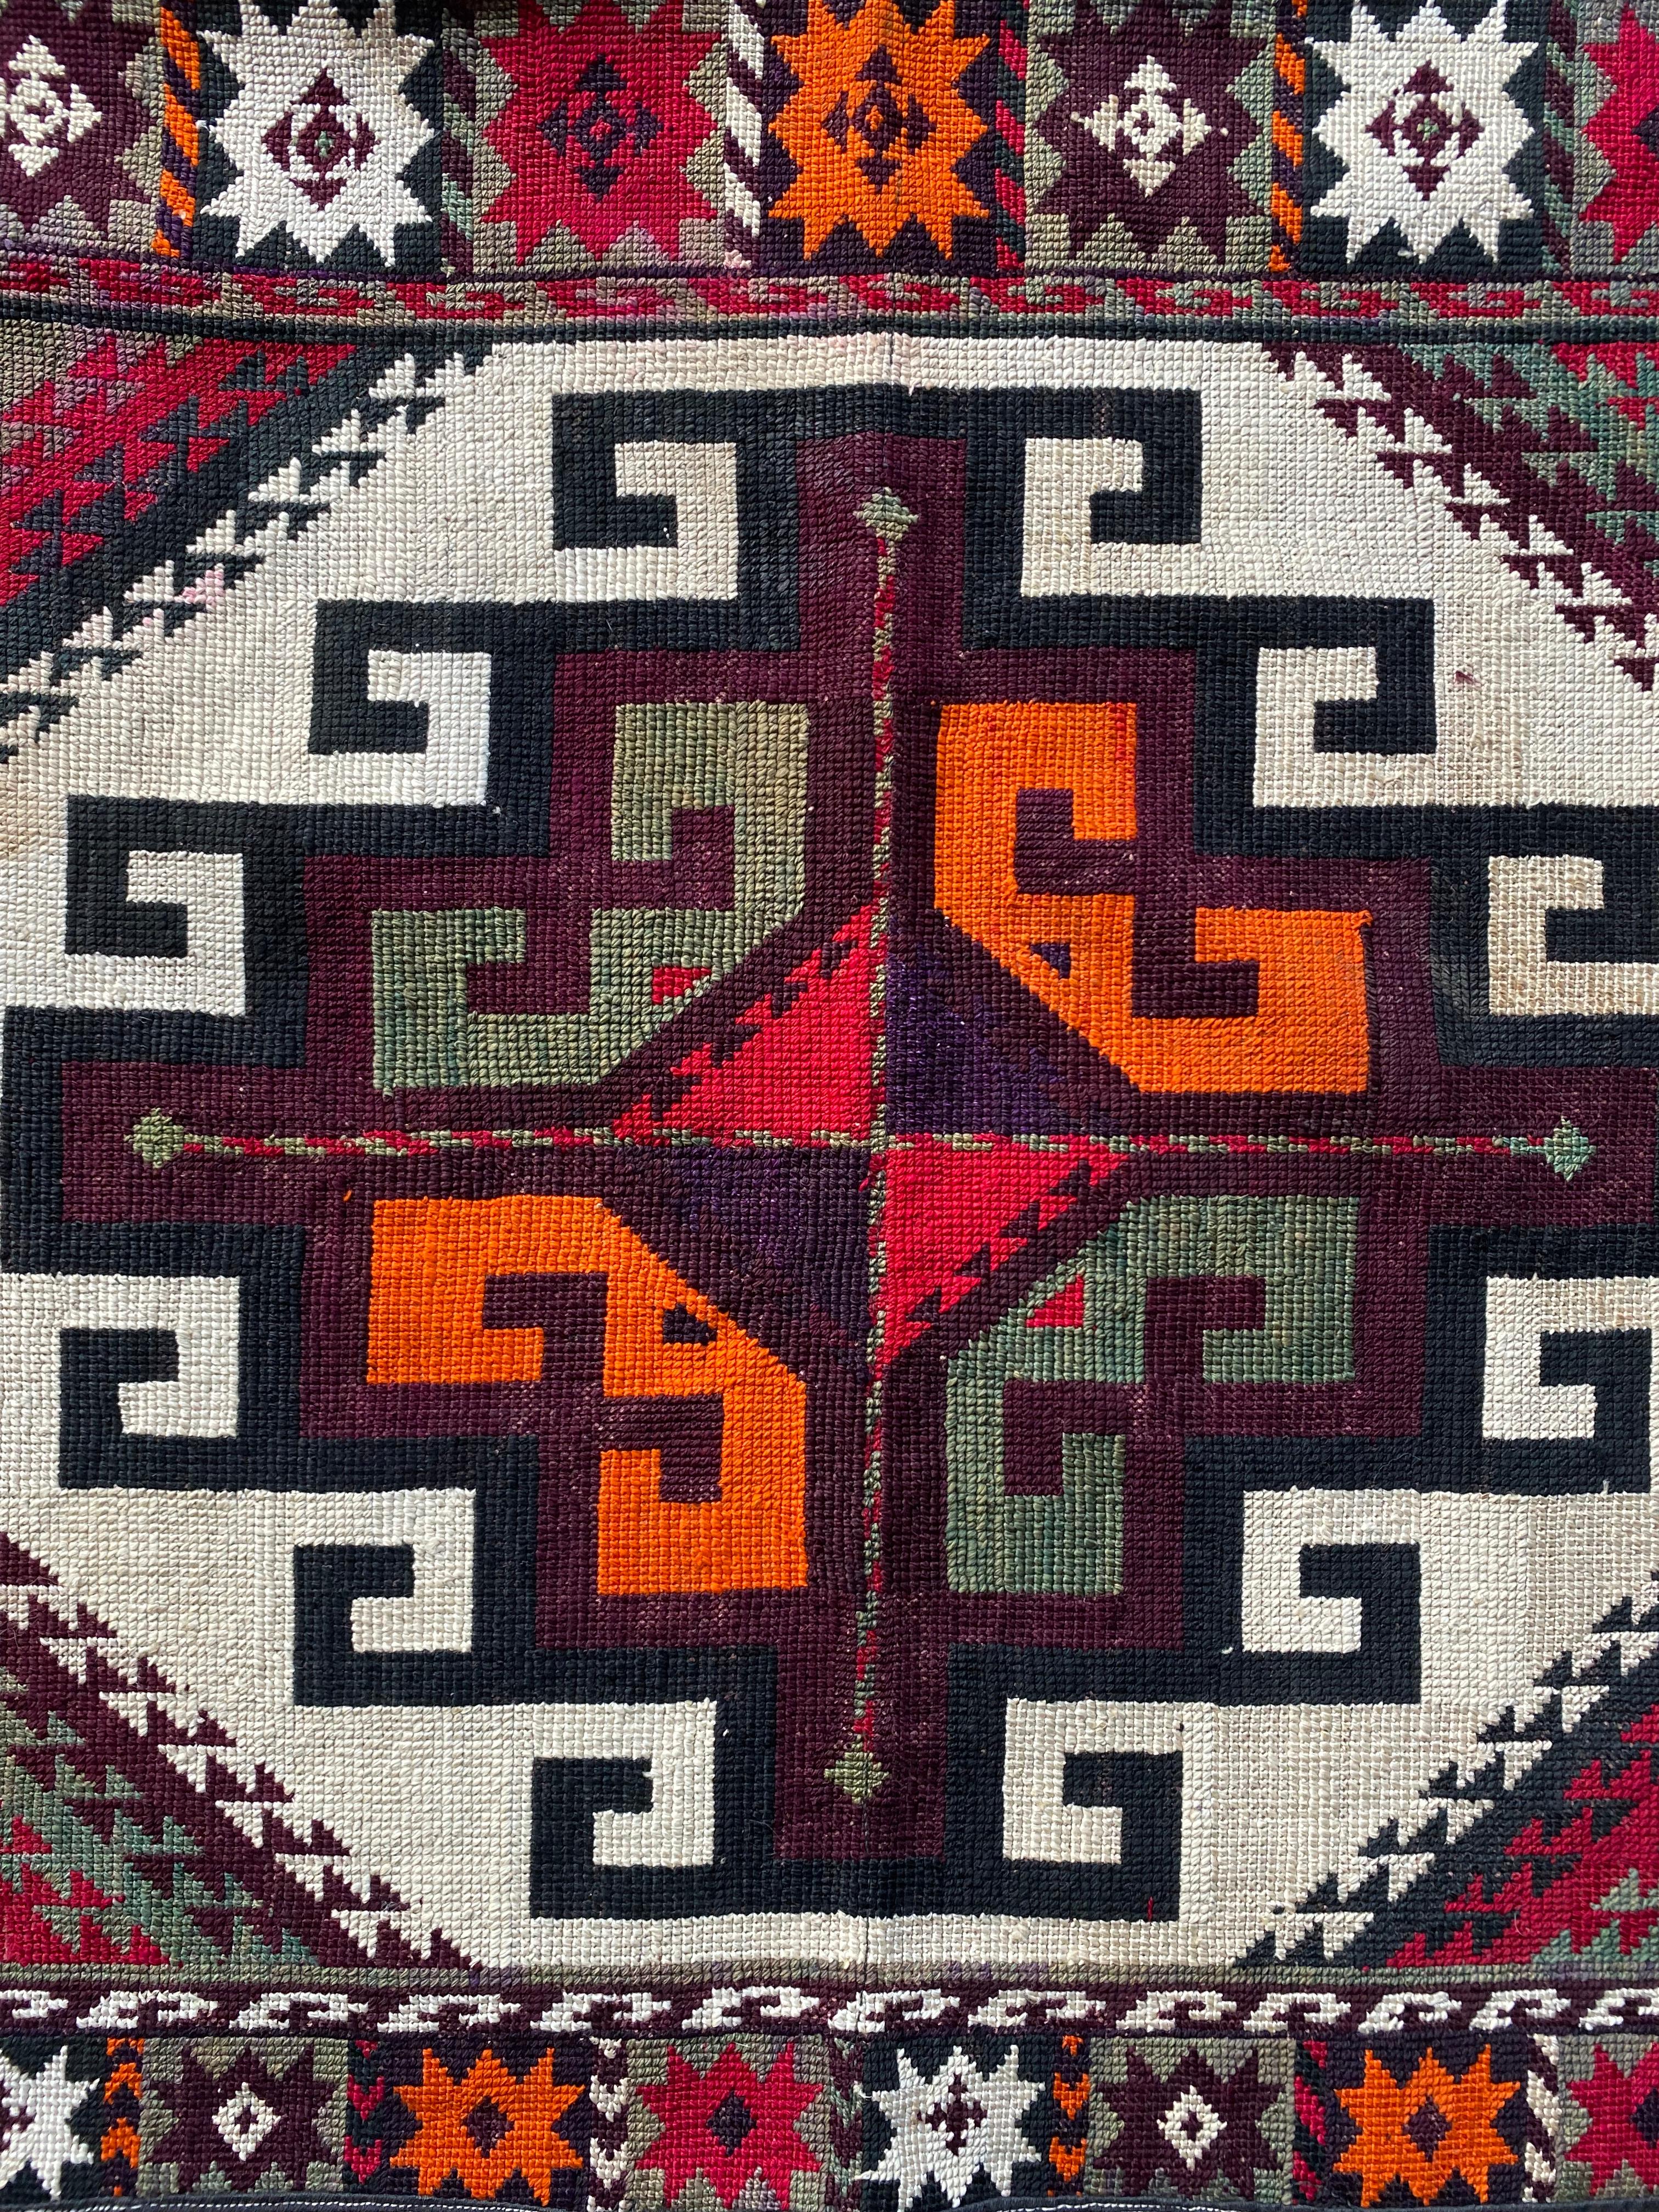 Central Asian Embroidered Textile, “Suzani”, Mid 20th Century  For Sale 3